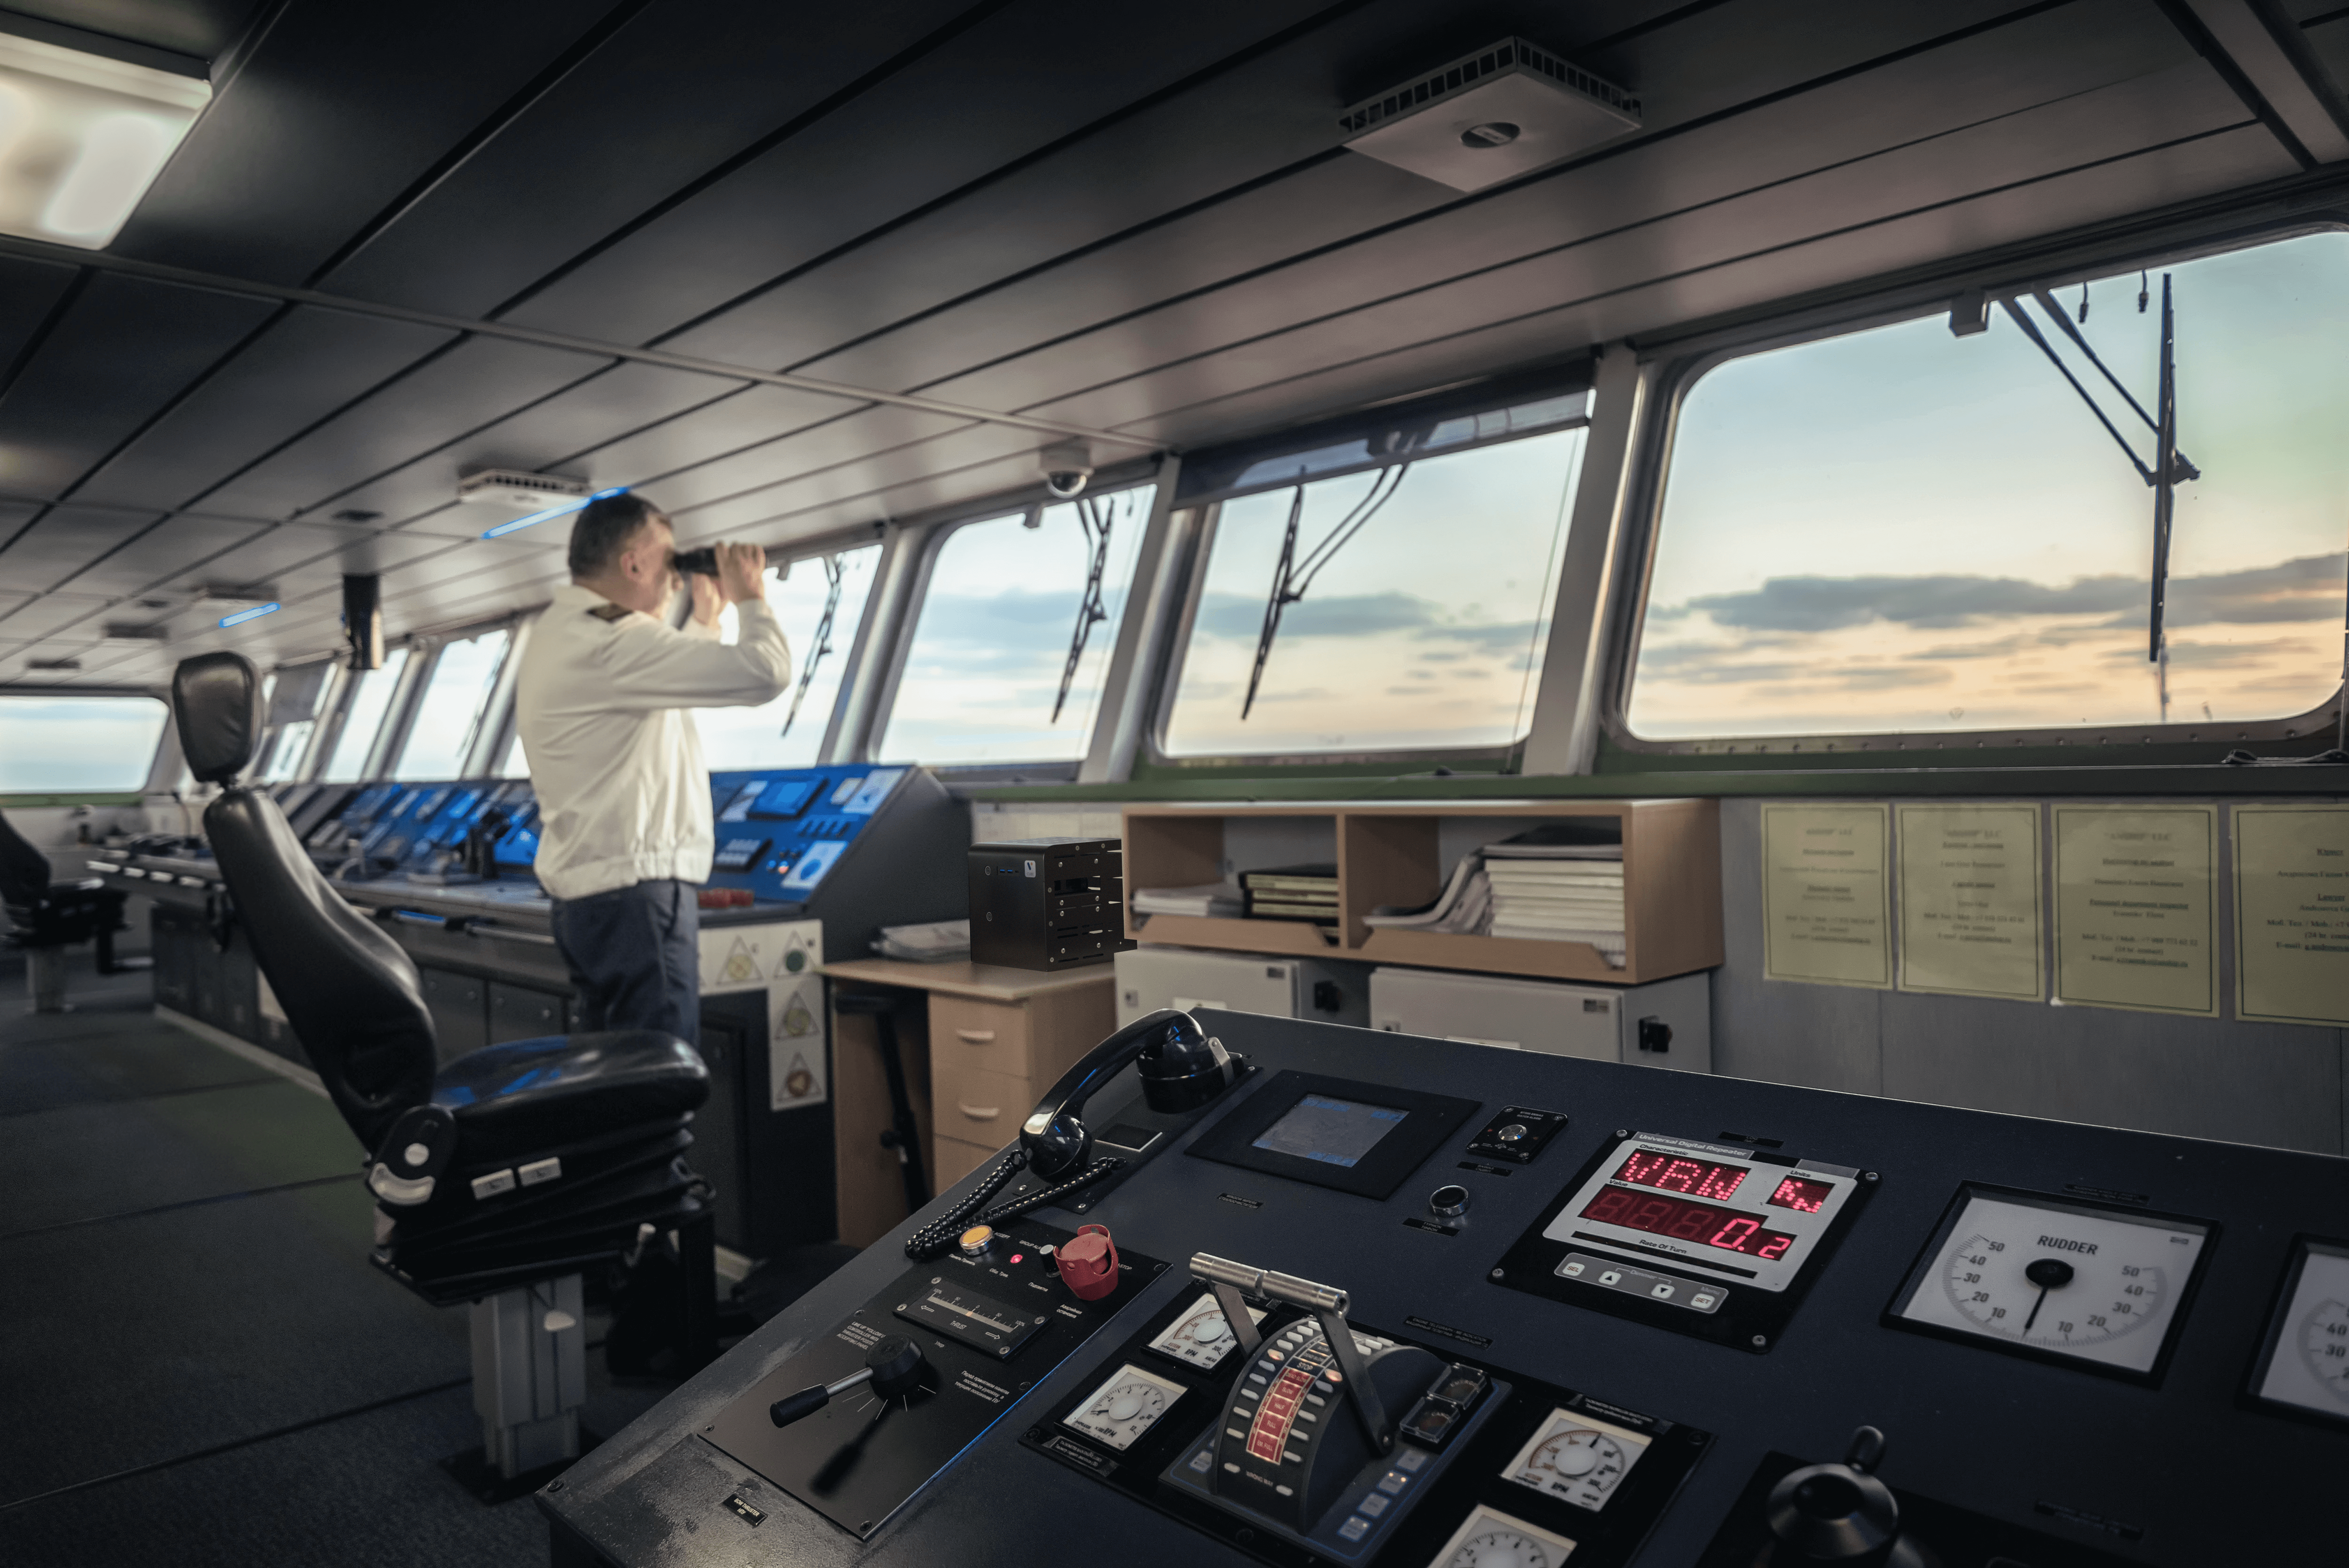 Smarter, cleaner, more connected: shipping’s digital future